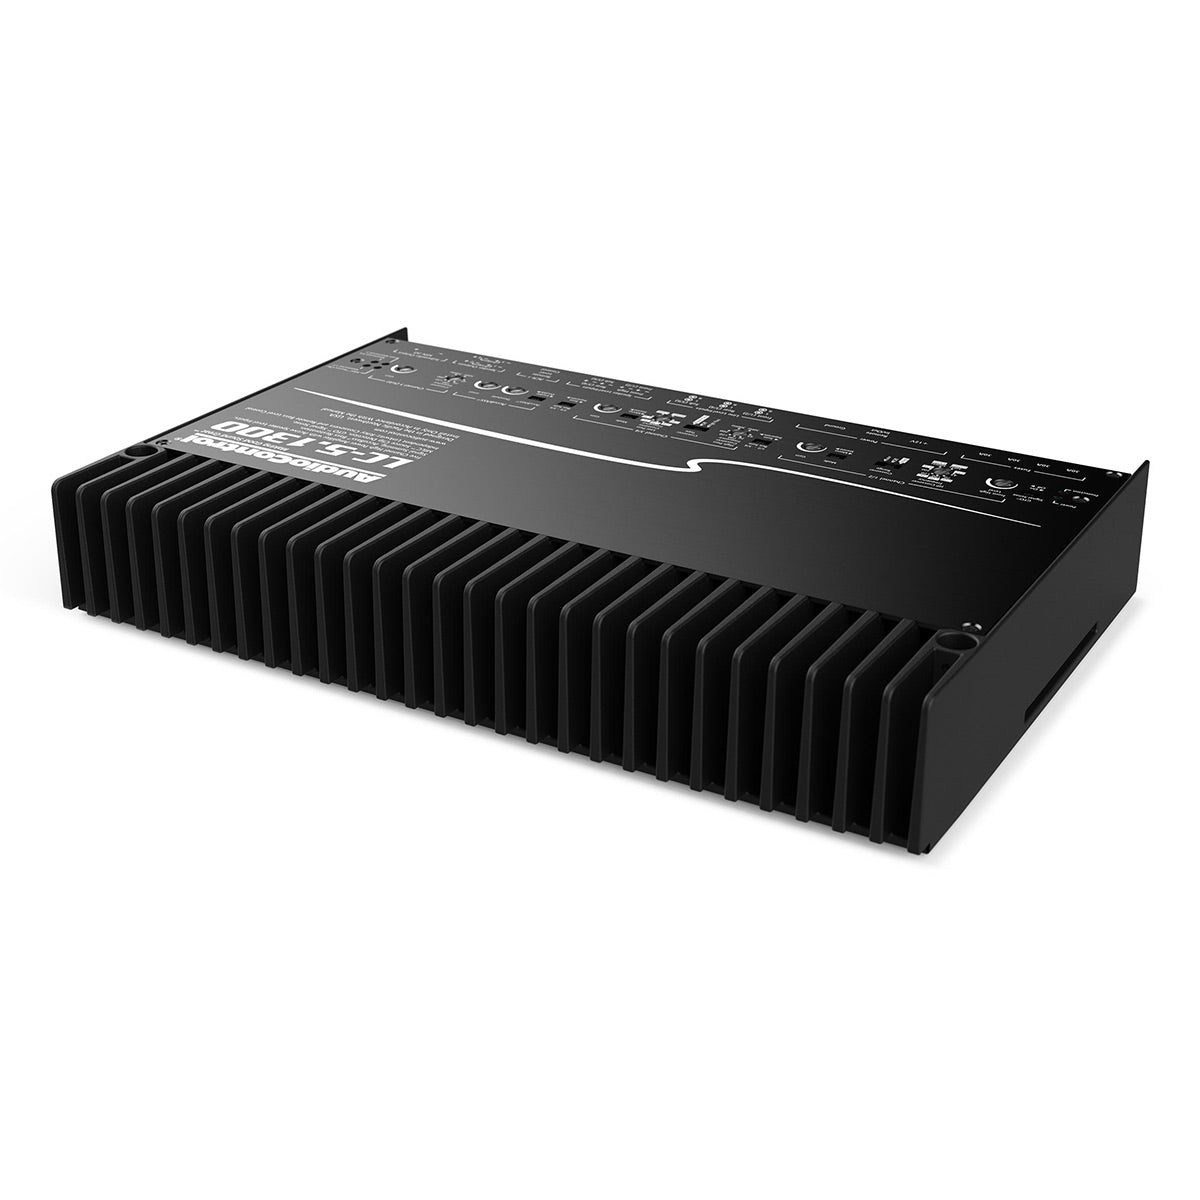 AudioControl LC-5.1300 High-Power Multi-Channel Amplifer with Accubass